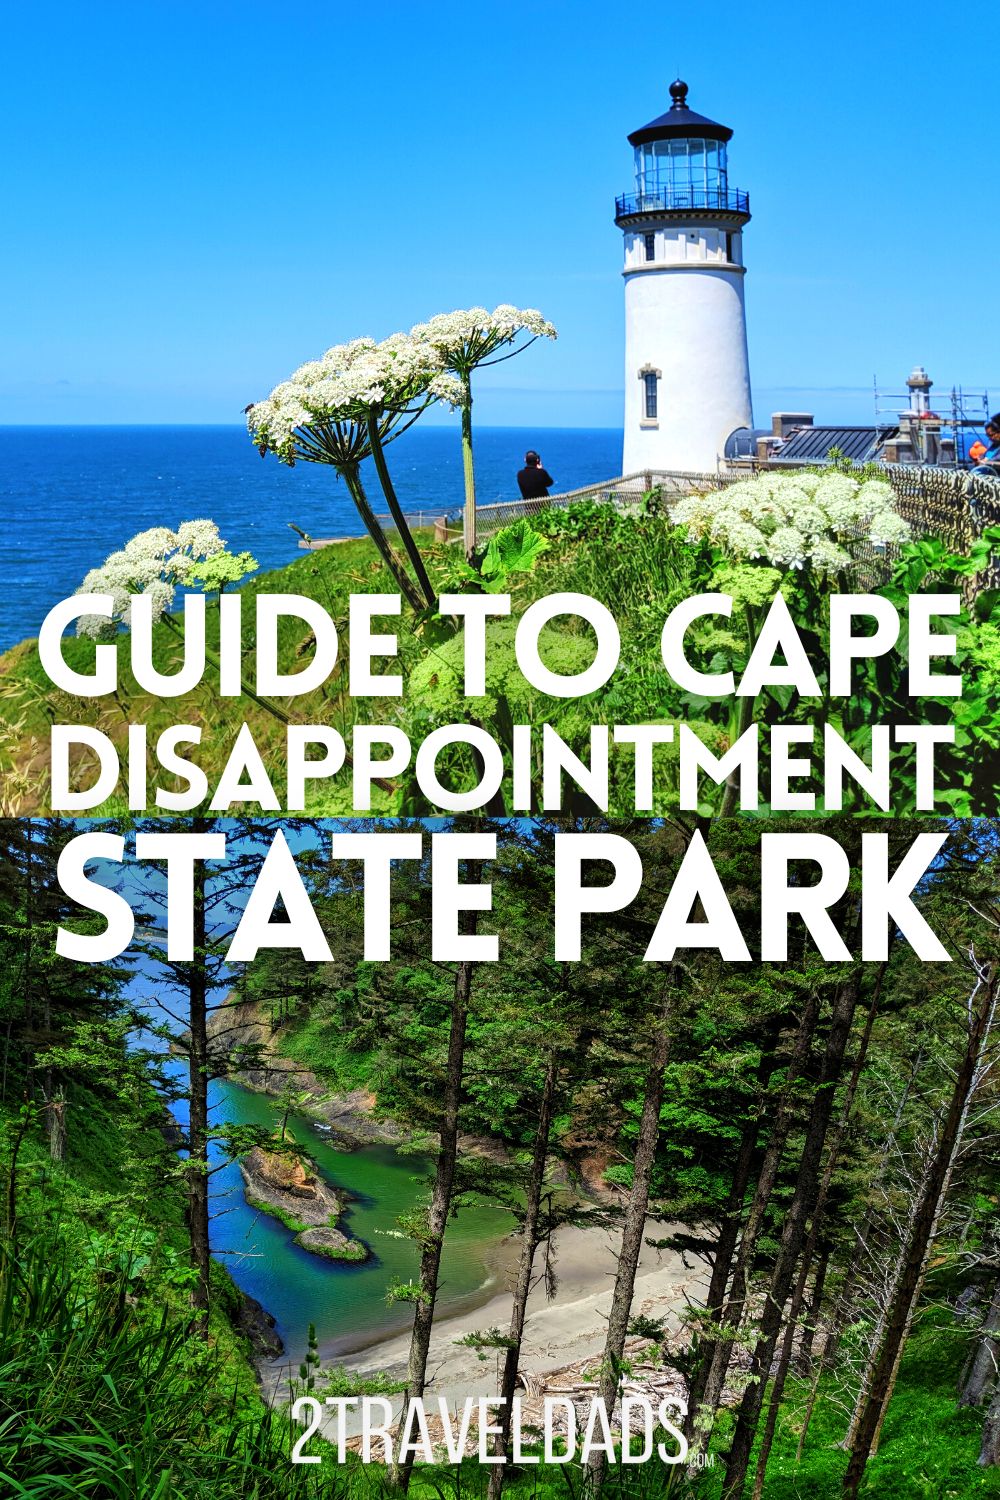 Cape Disappointment State Park in Ilwaco is NOT a disappointment at all! An awesome destination for hiking, biking and lighthouses, Cape Disappointment is great to visit in summer or storm season. Check out things to do and where to stay here!